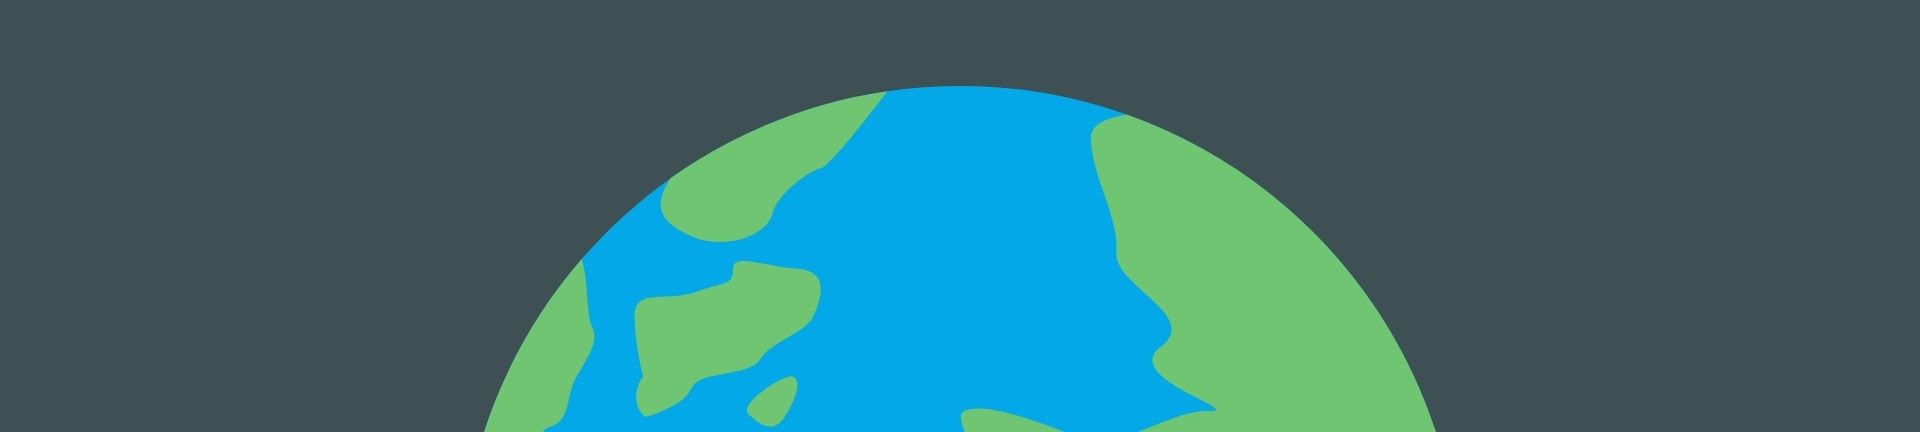 Header showing the earth